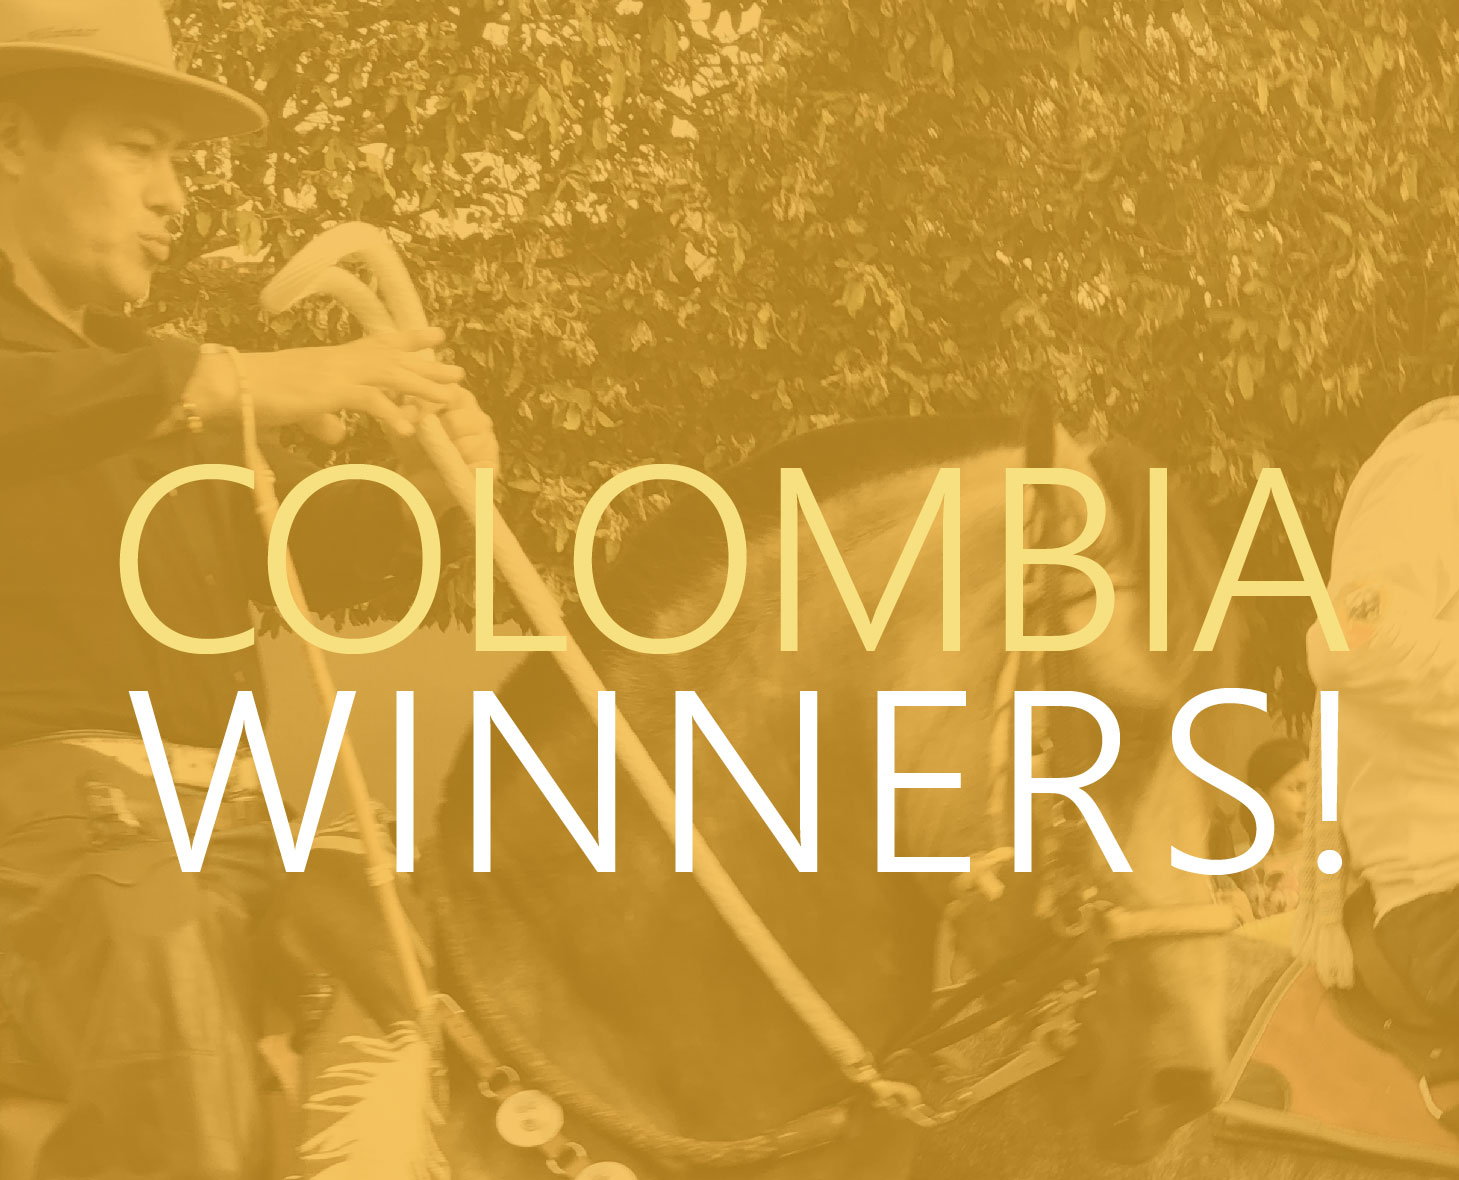 Colombia Winners-cowboys-Teaser2